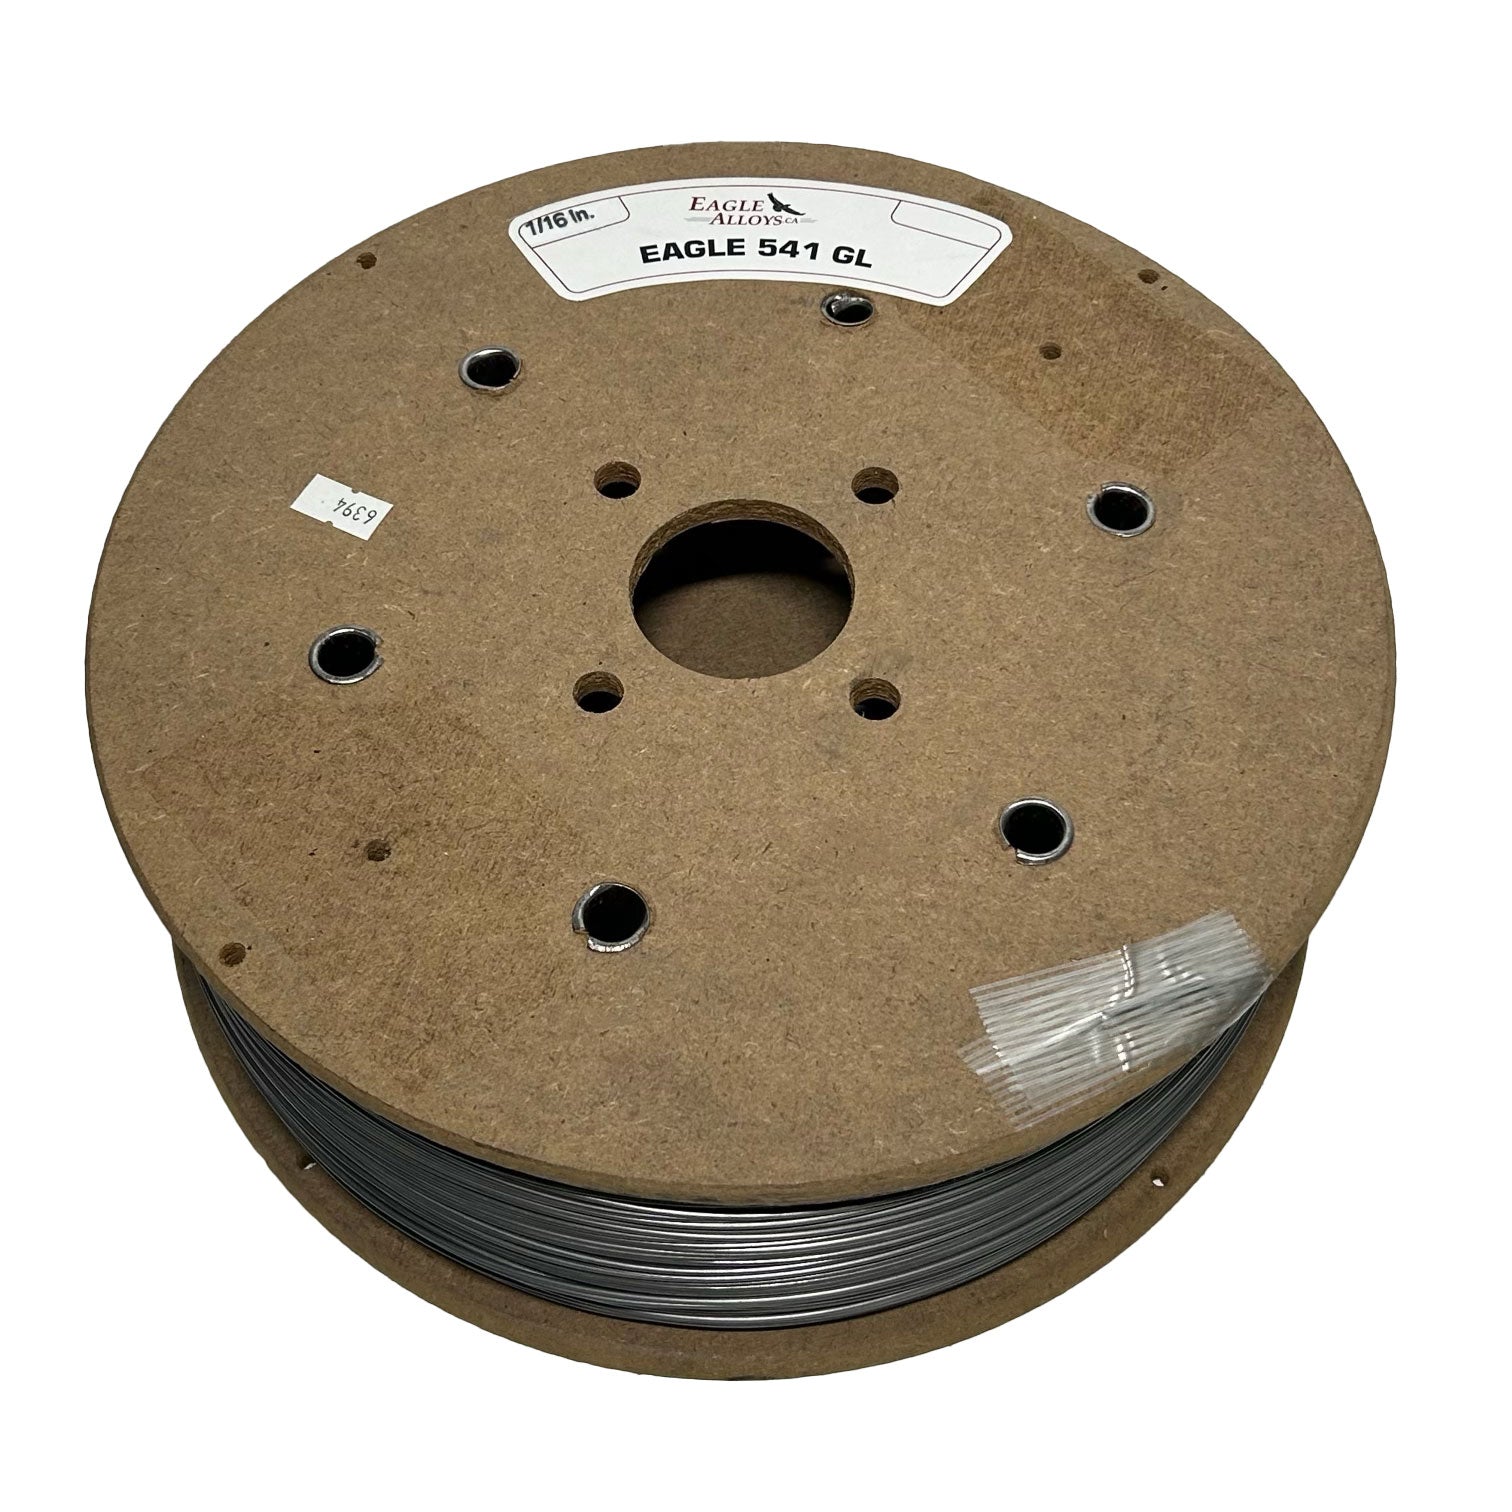 EAGLE 541 GL  Self Shielded Flux Cored Open Arc Wire For Build-up On Manganese Steels